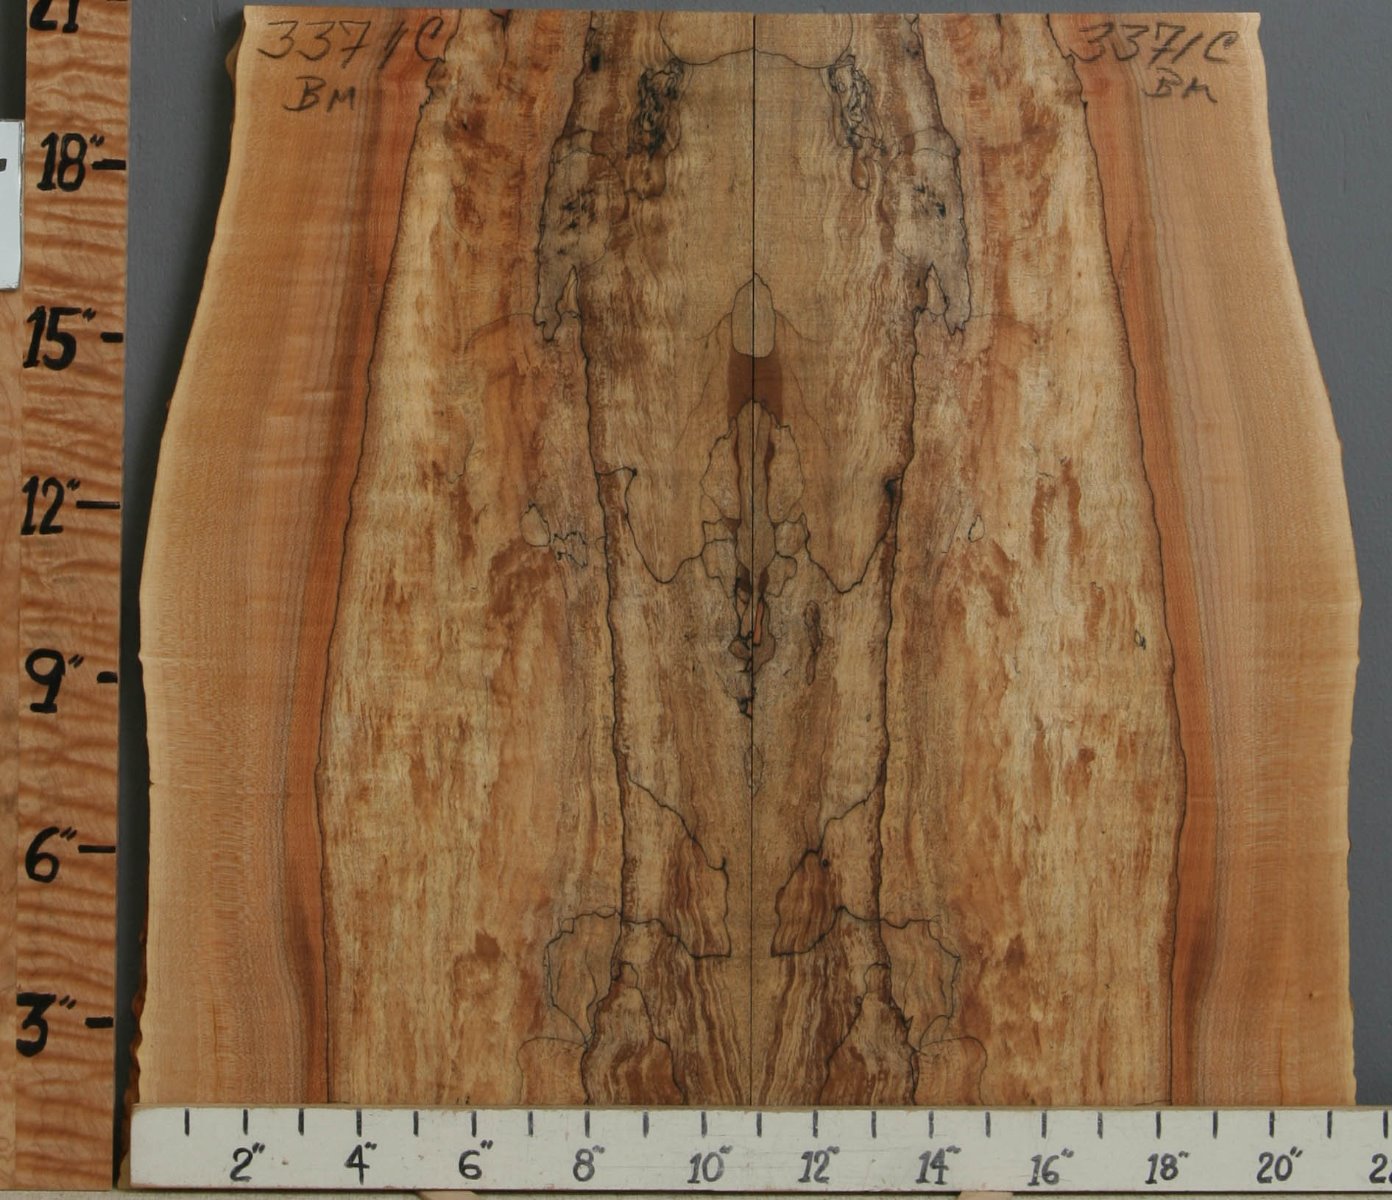 5A Spalted Curly Maple Microlumber Bookmatch with Live Edge 23 X 31 X 1/2  (NWT-7985C)